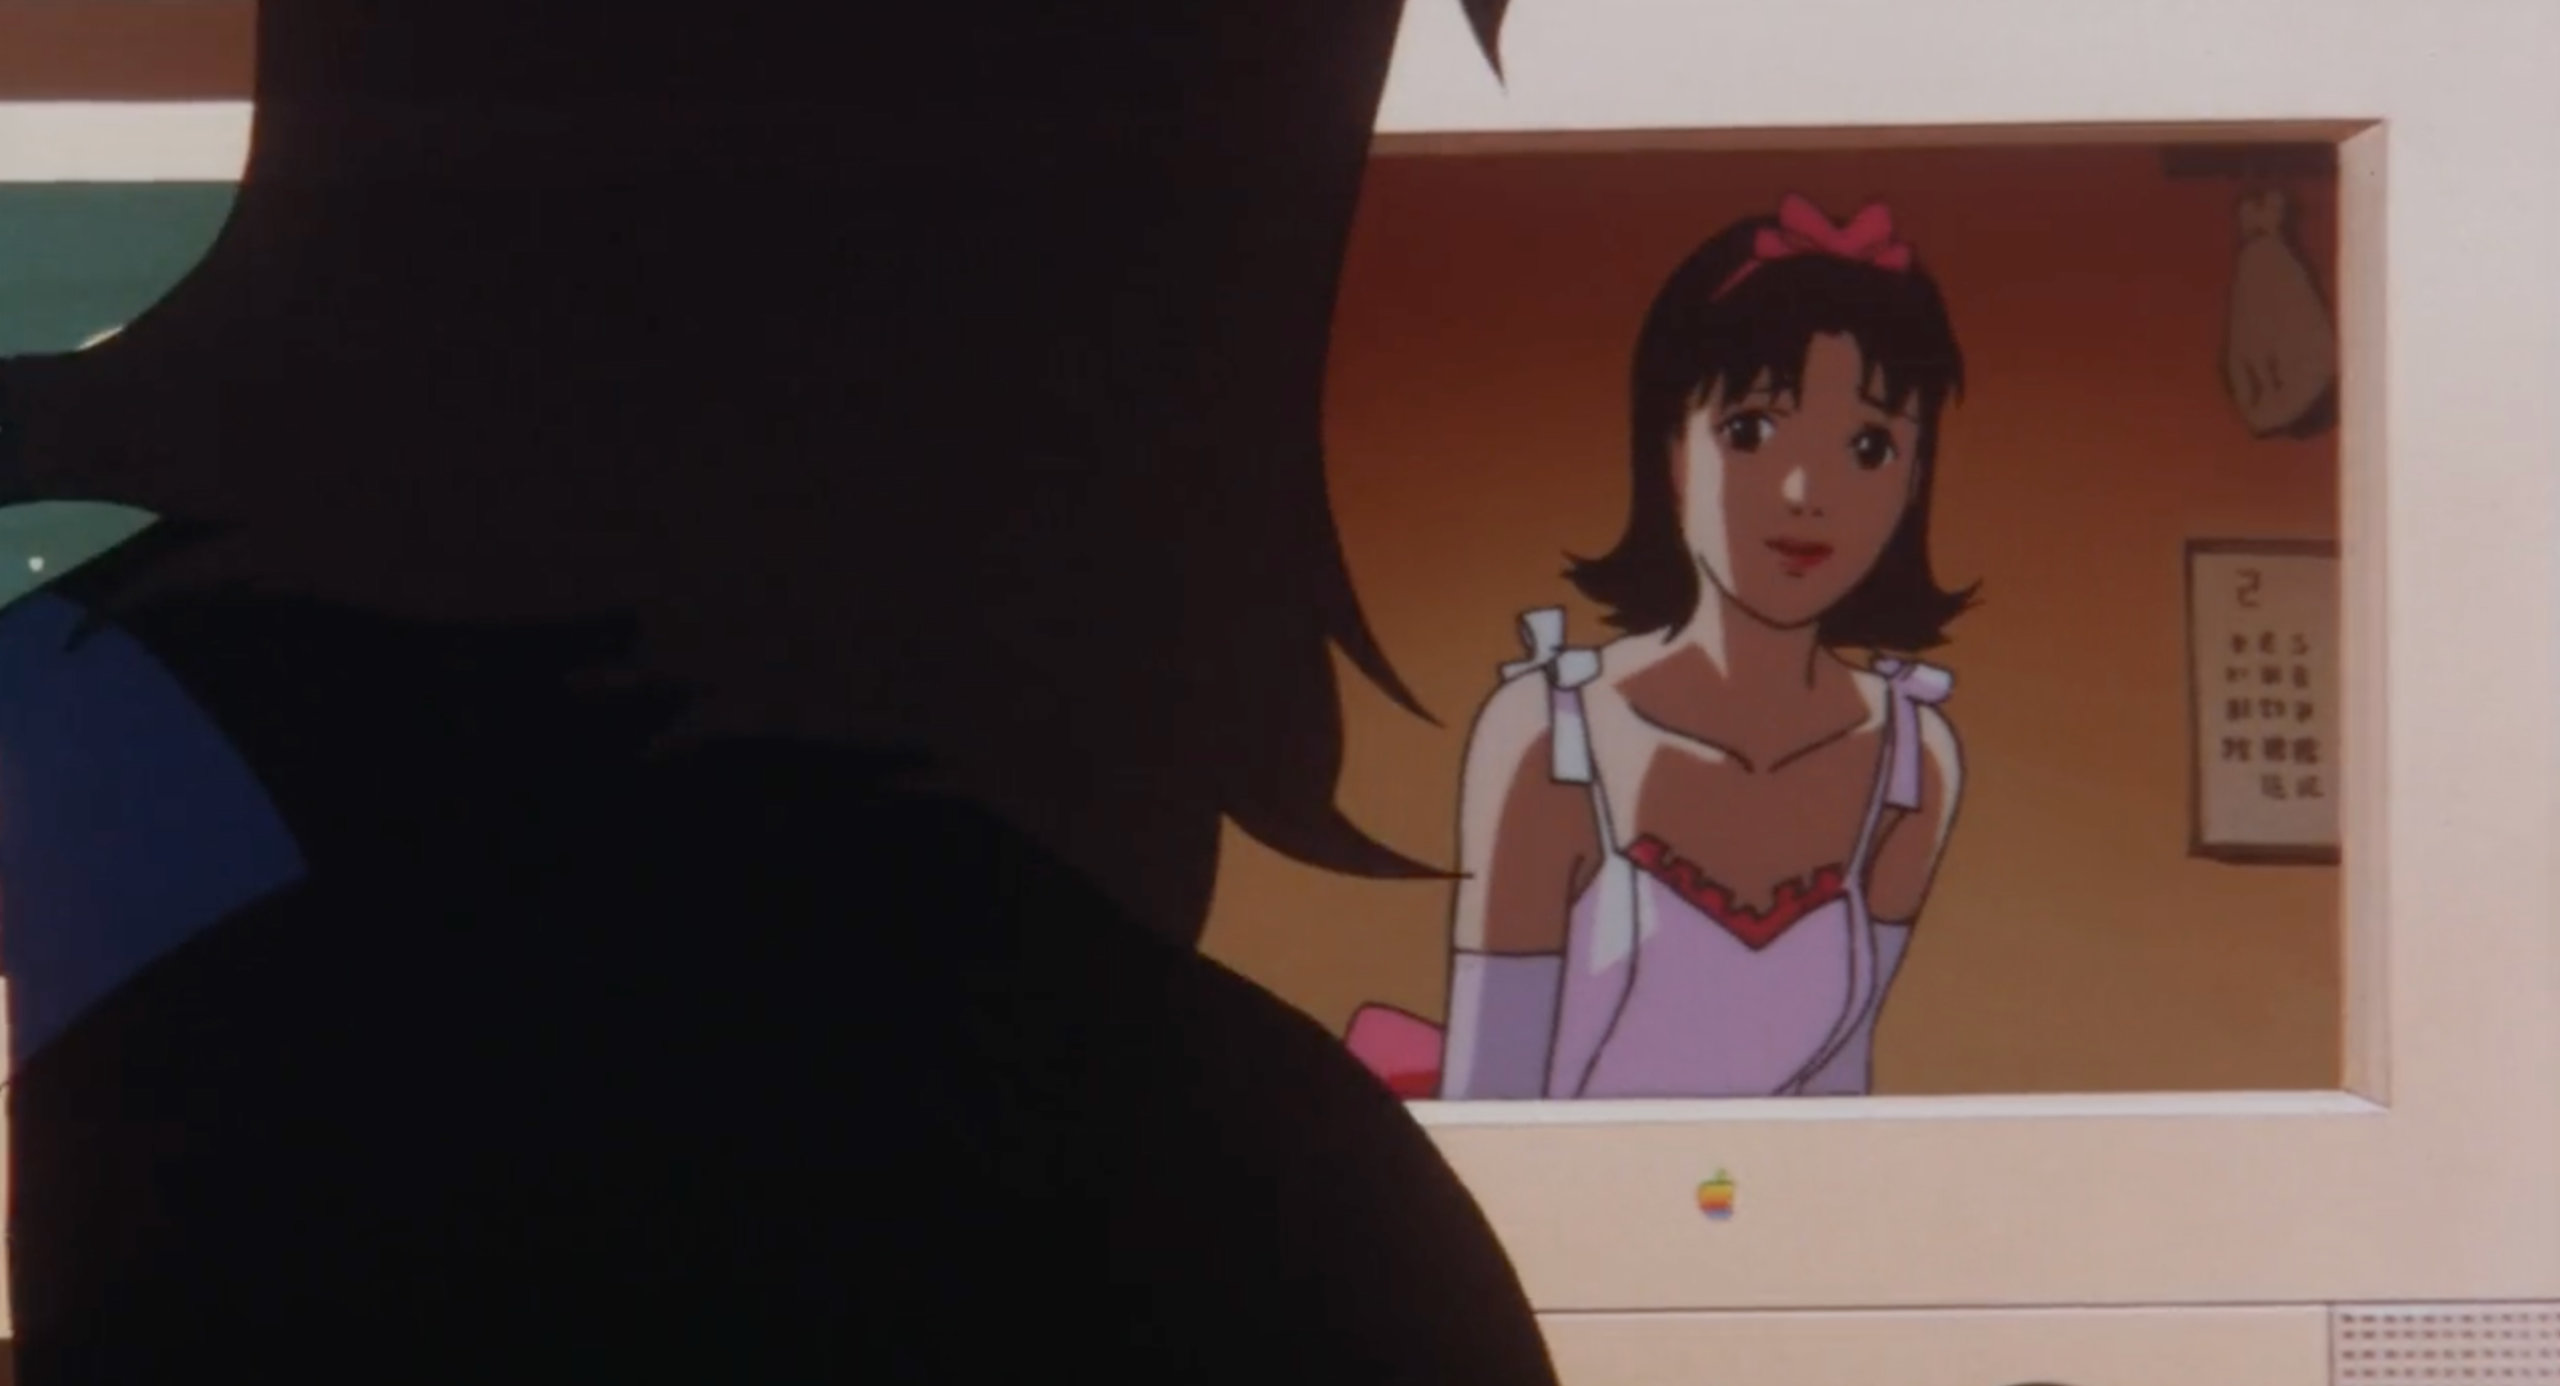 Virtual Mima appears in Mima's computer in Perfect Blue